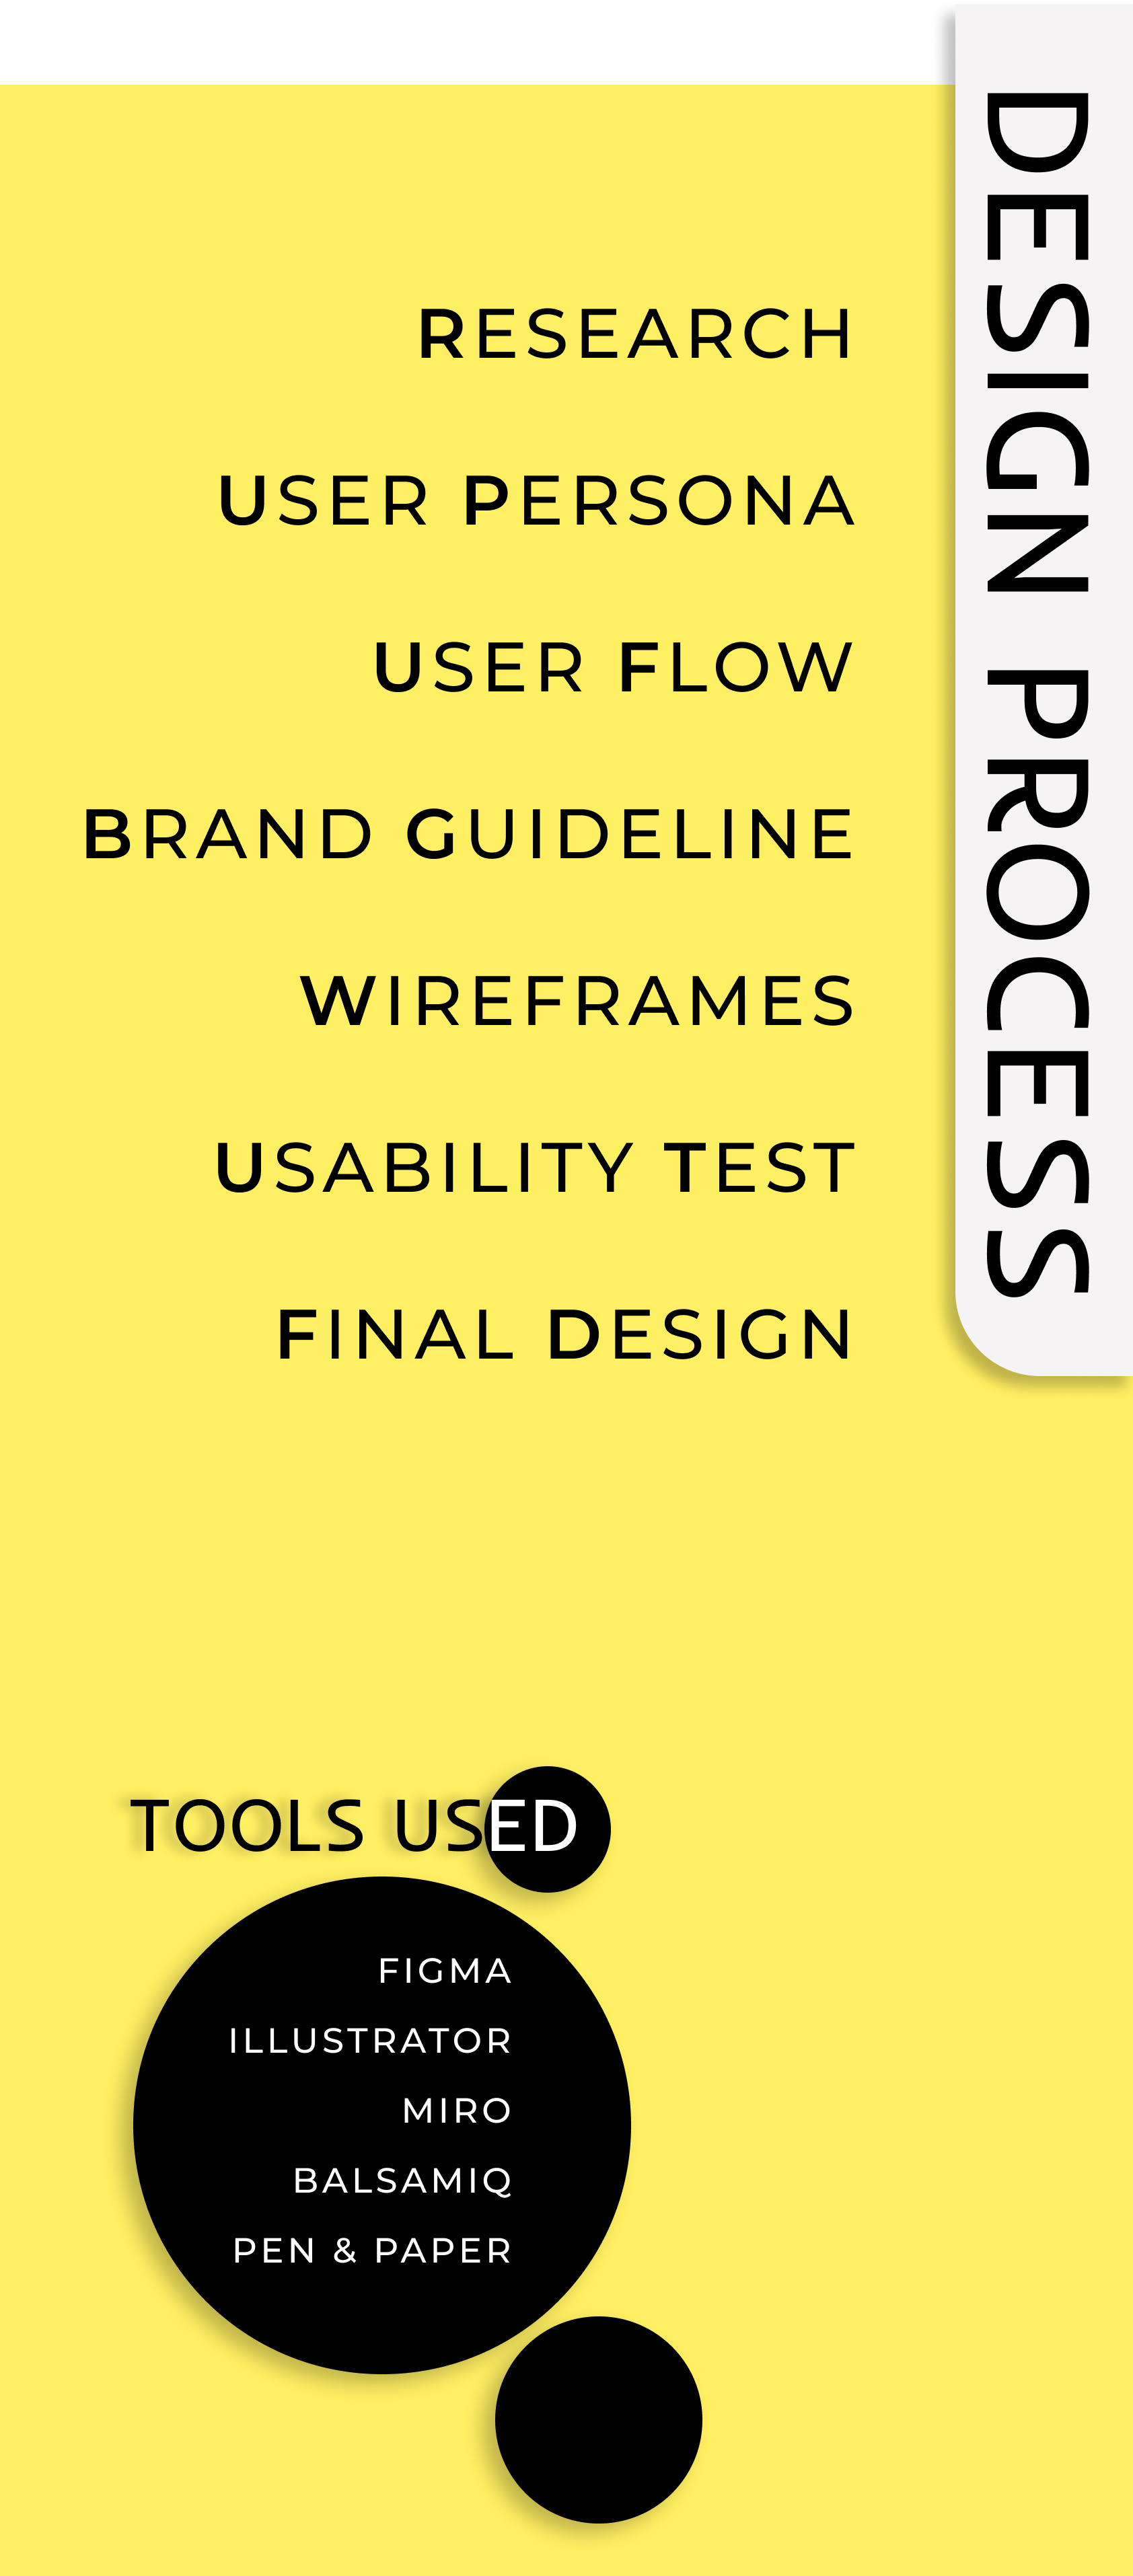 DESIGN-PROCESS-AND-TOOLS